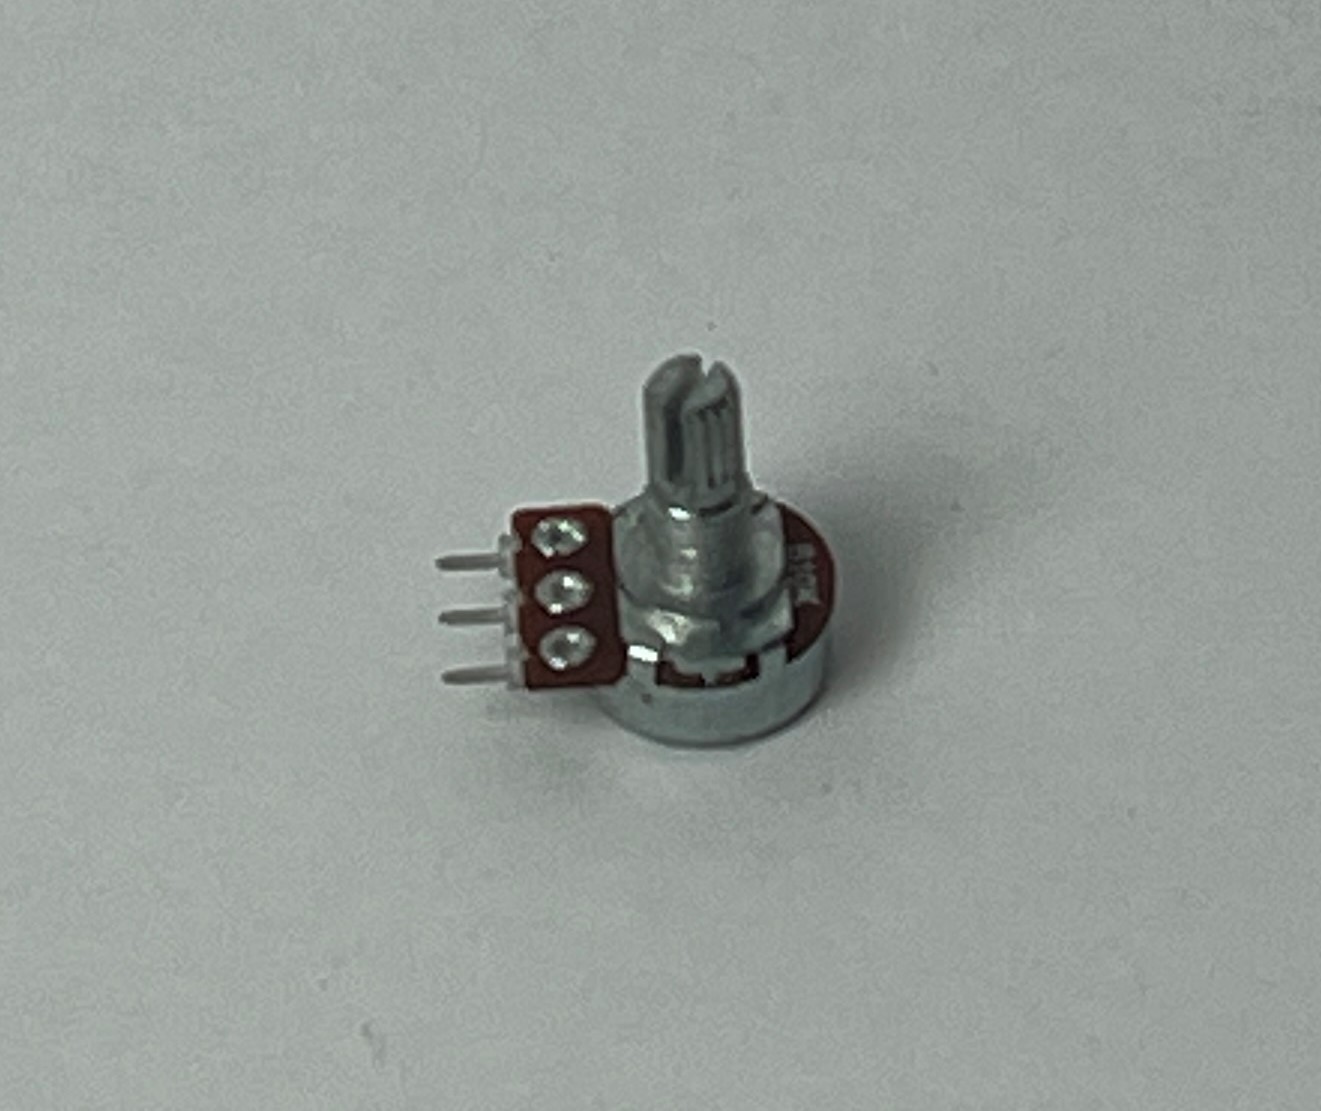 Picture of a potentiometer